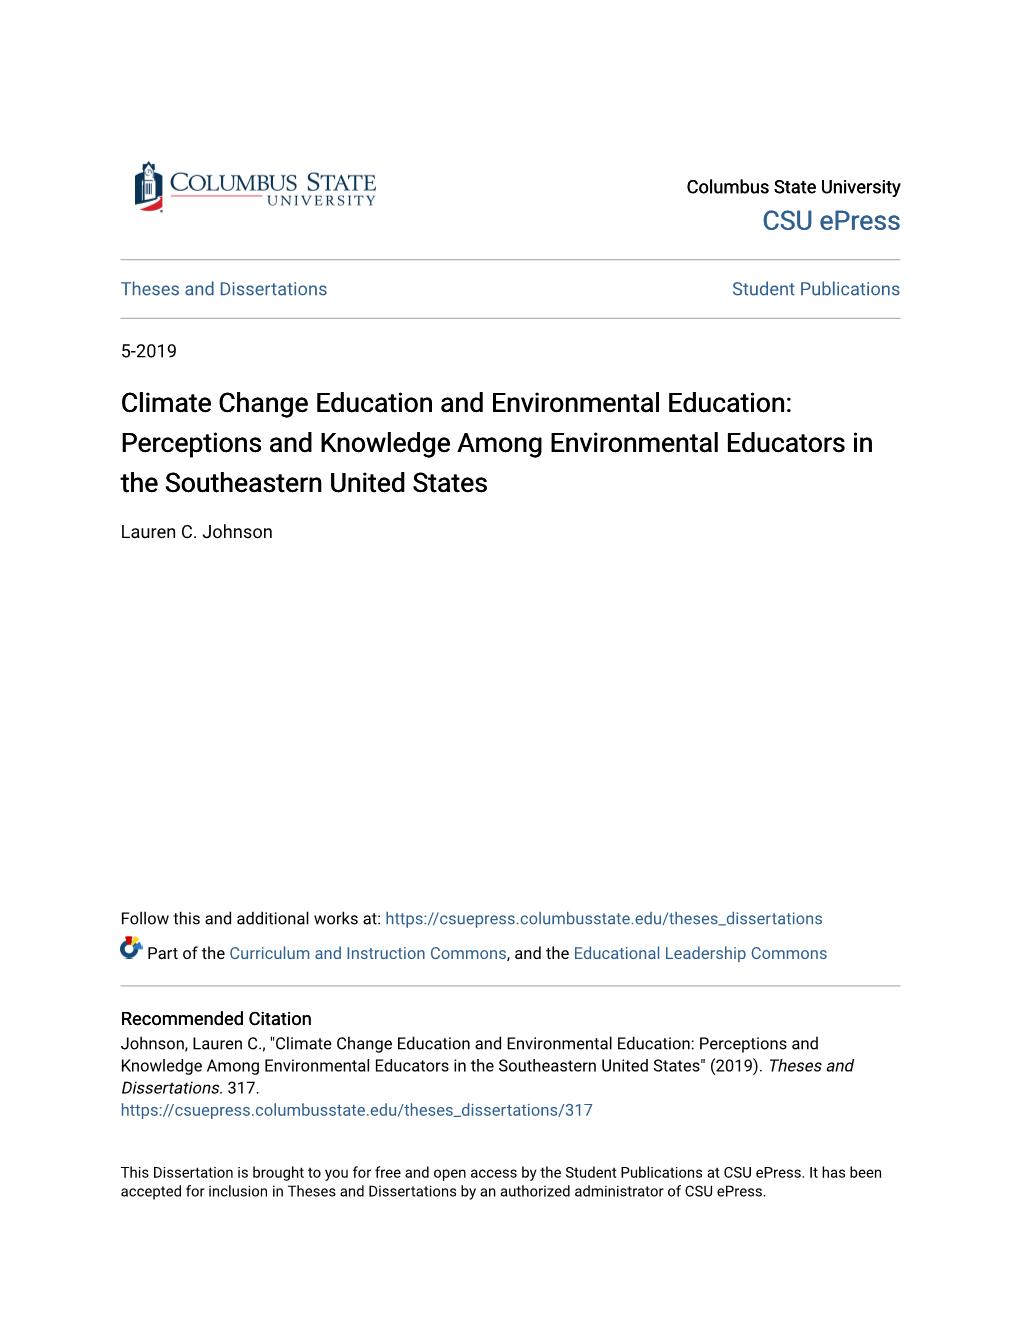 Climate Change Education and Environmental Education: Perceptions and Knowledge Among Environmental Educators in the Southeastern United States